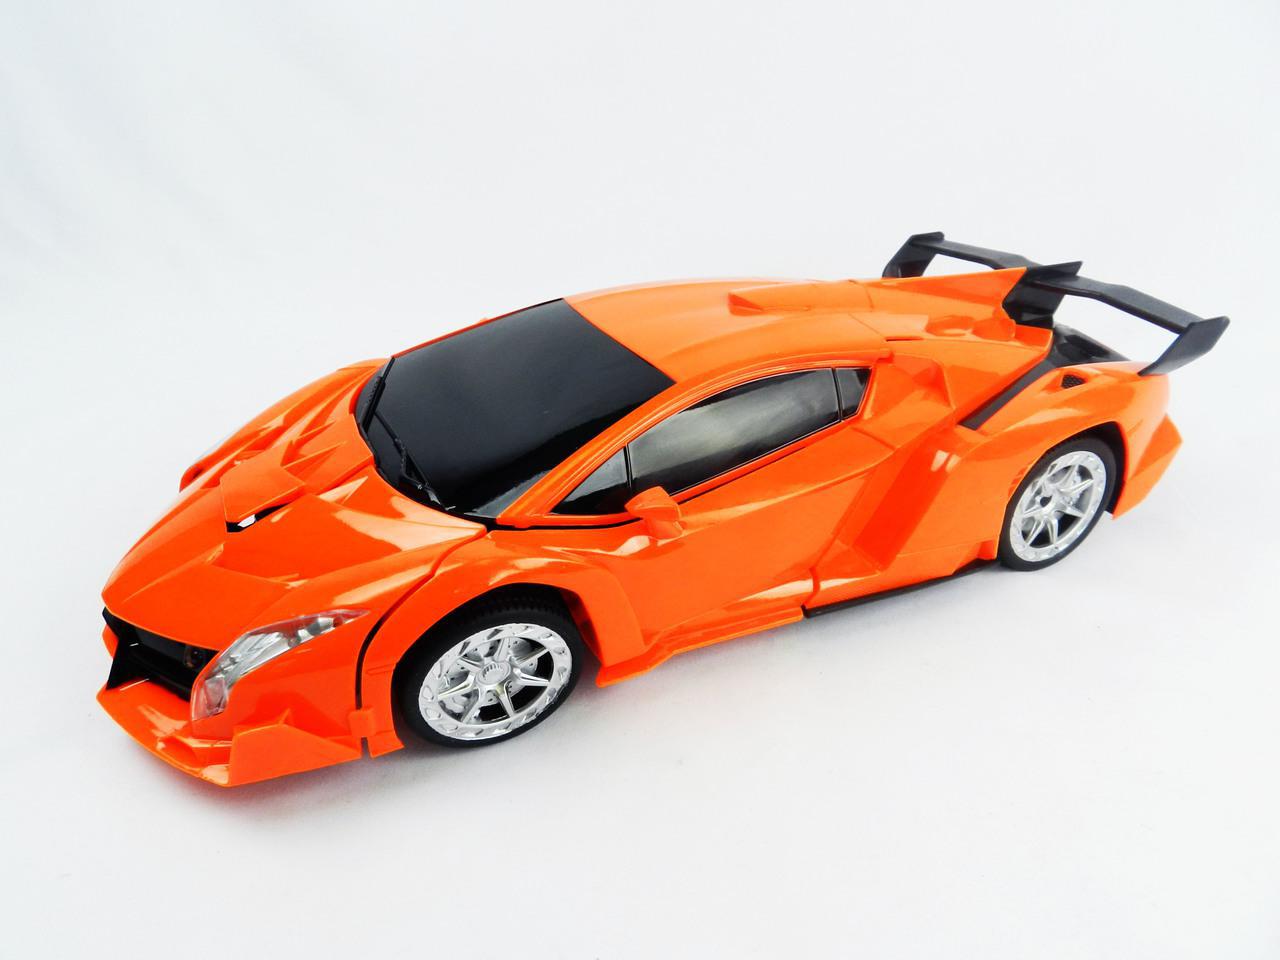 Transform Car Robot, 1:12 Electronic Remote Control - RC Vehicles Feature One Button Transforming and Realistic Engine Sound